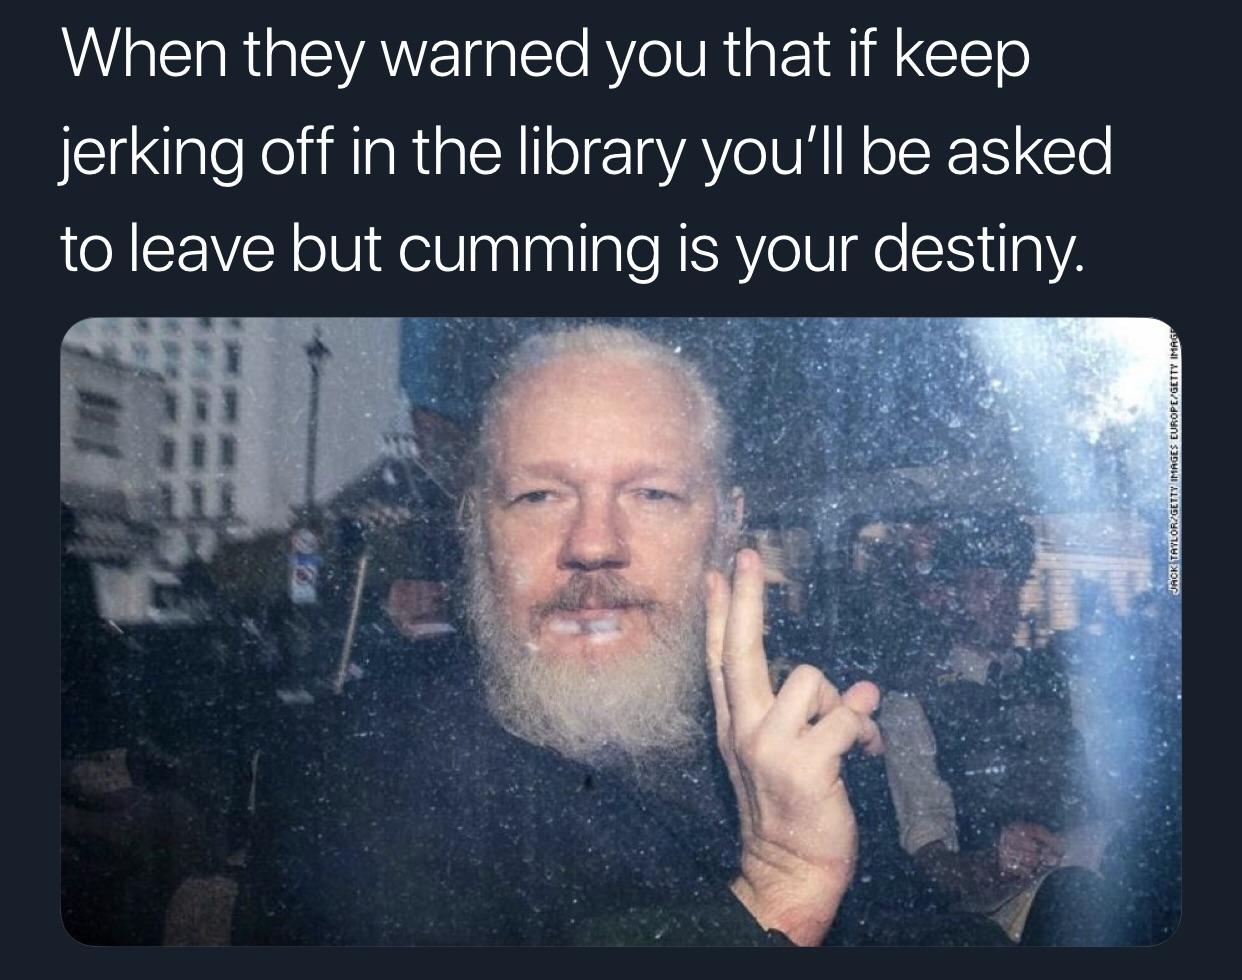 Julian Assange arrest meme that says 'when they warned you that if you keep jerking off in the library you'll be asked to leave cumming is your desitny'